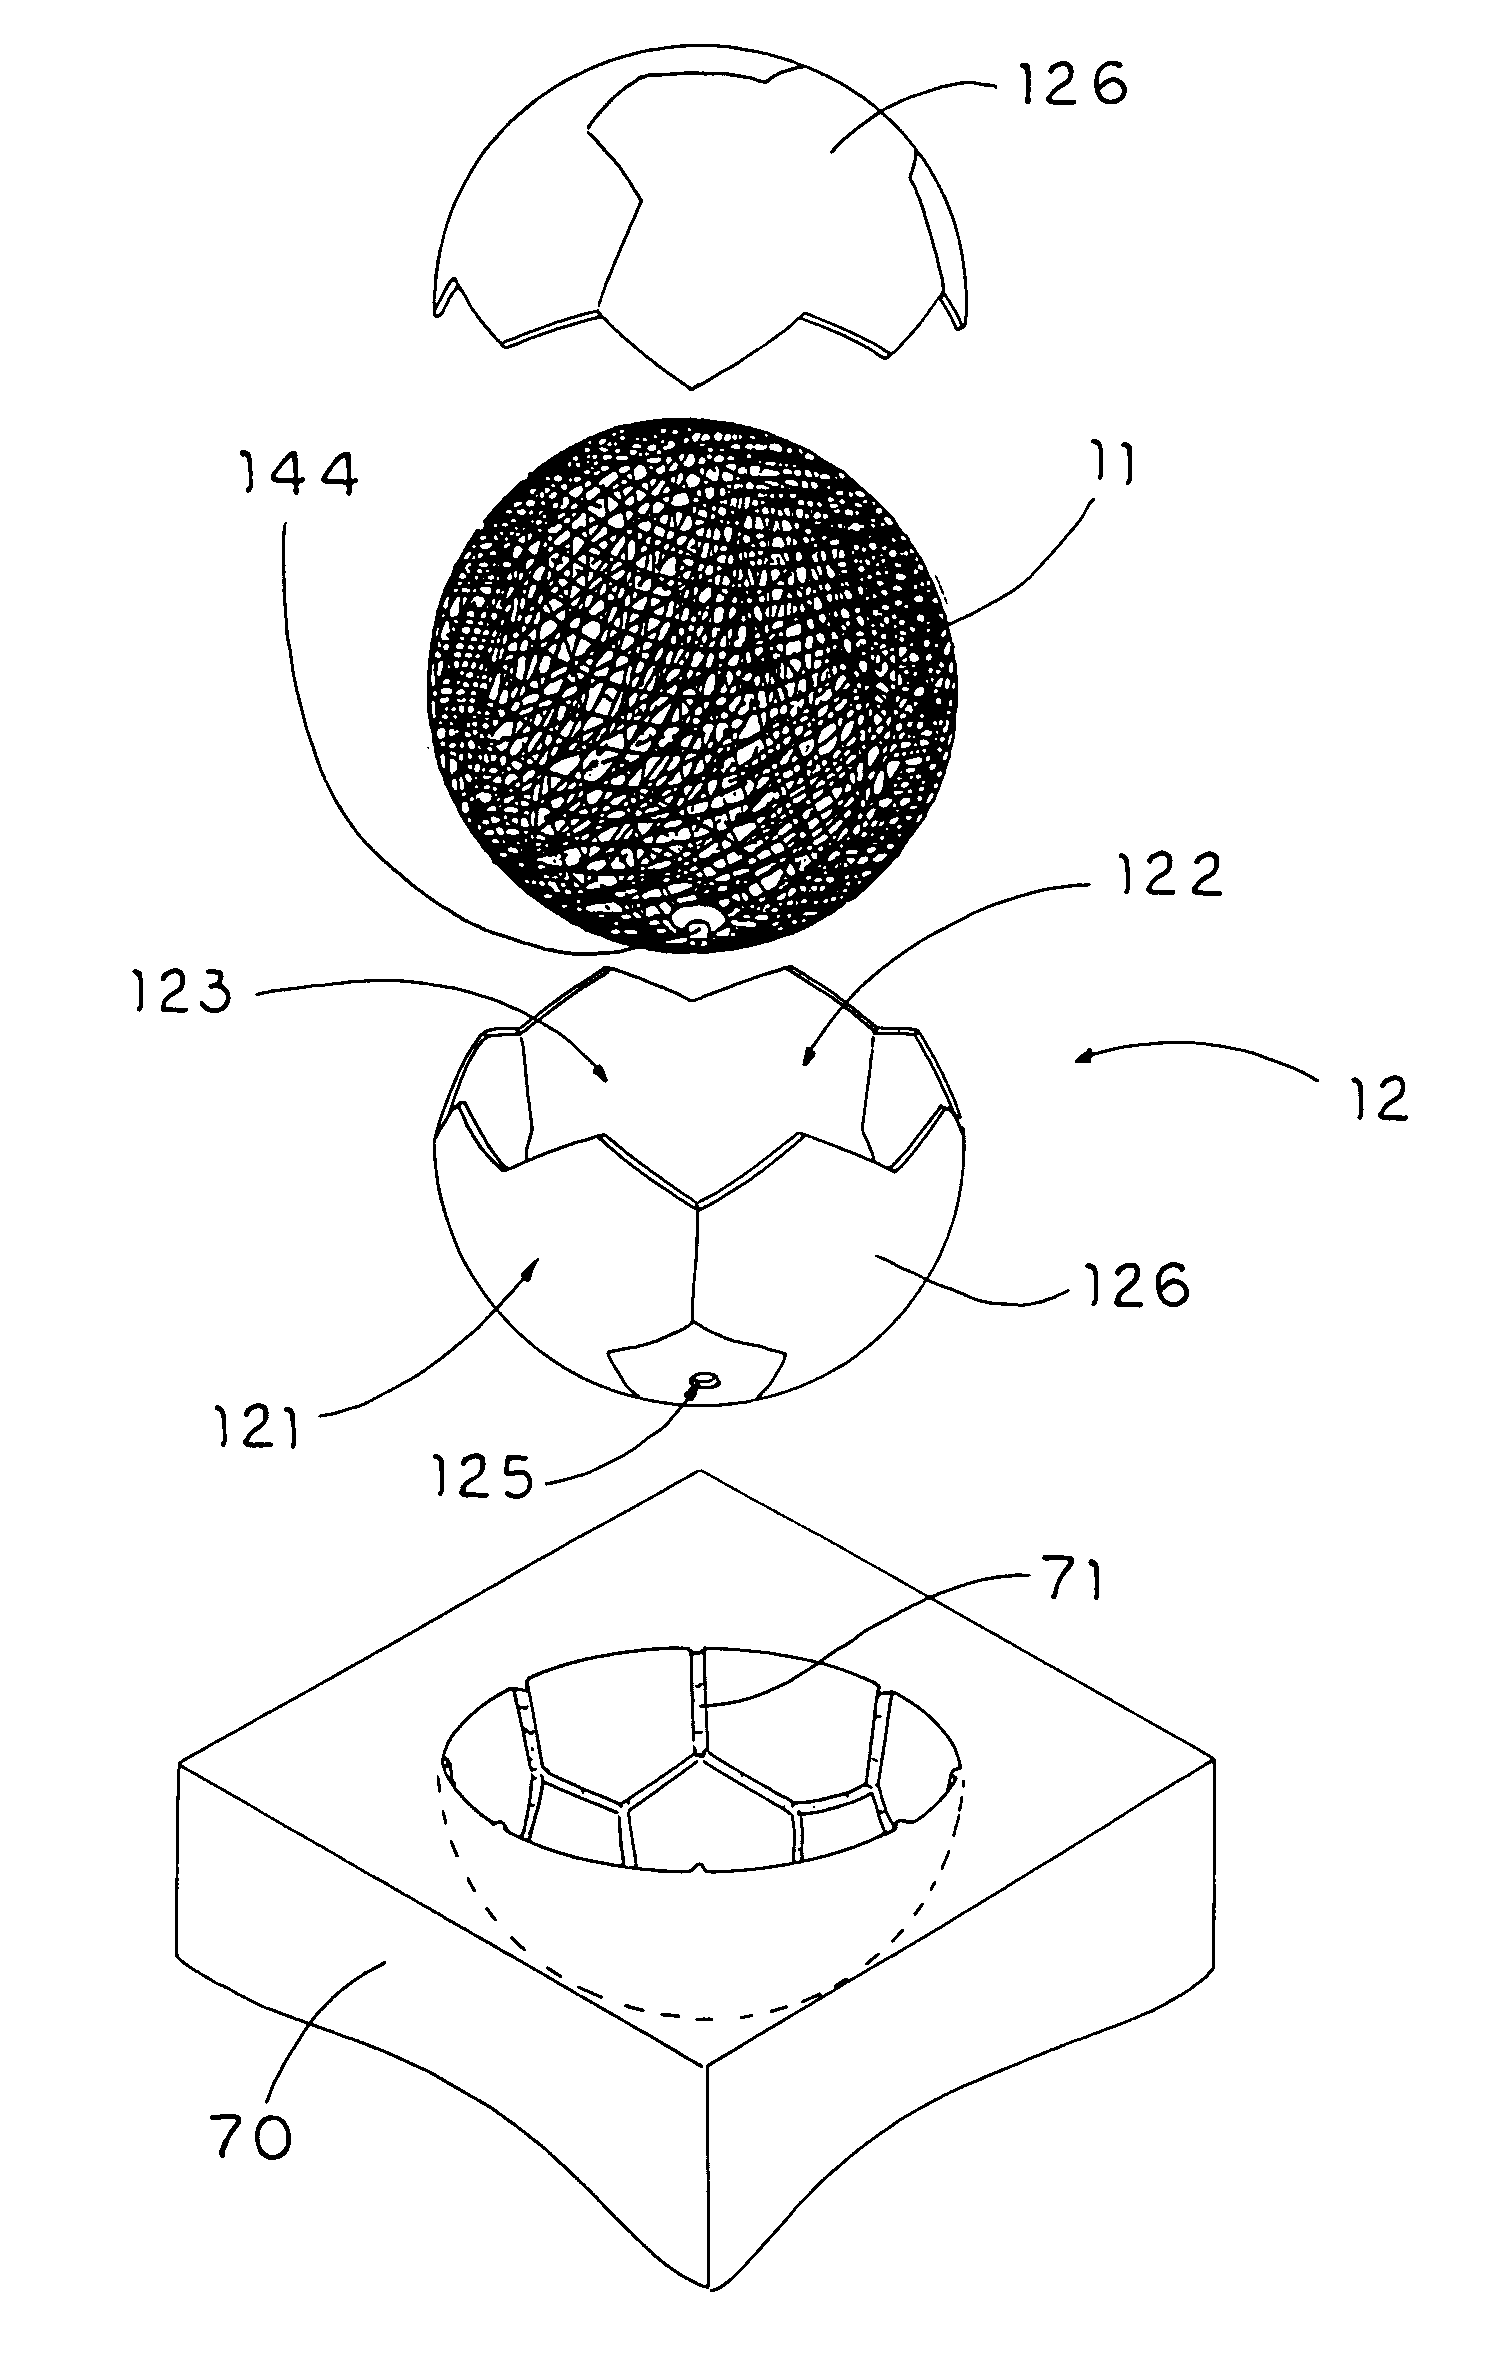 Sportsball with integral ball casing and bladder body